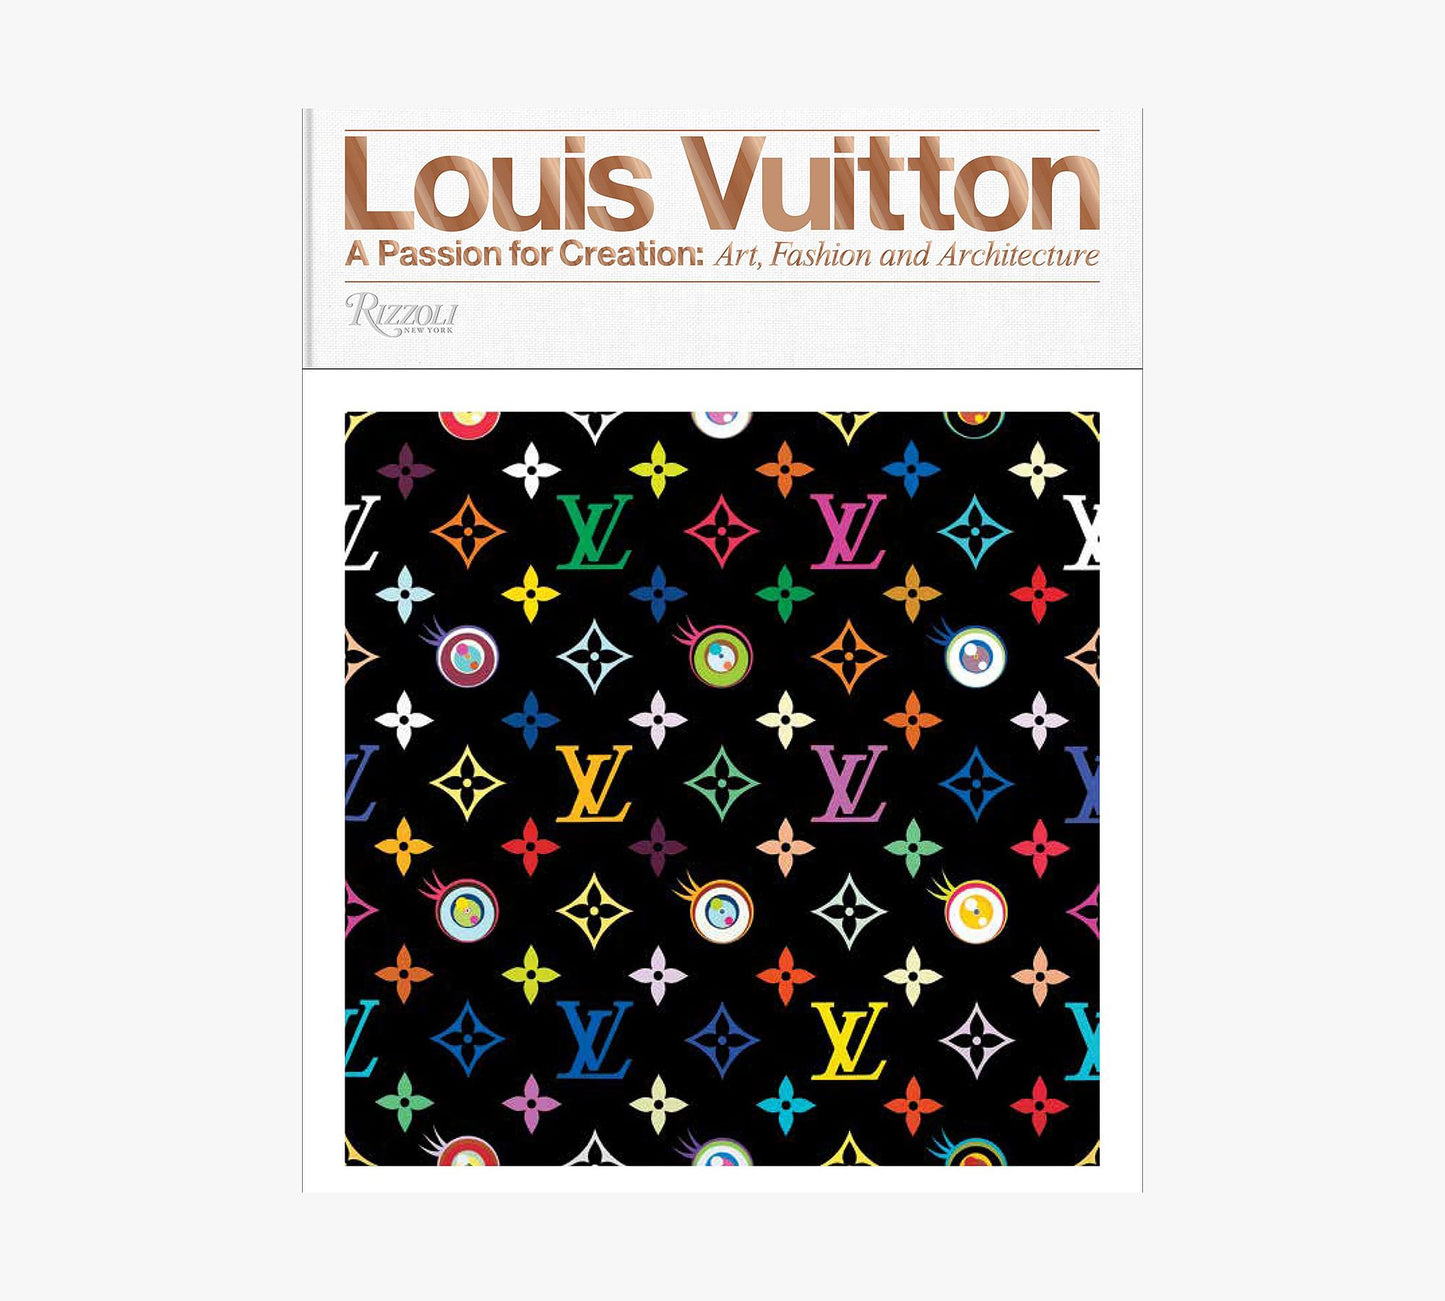 Louis Vuitton: A Passion for Creation: New Art